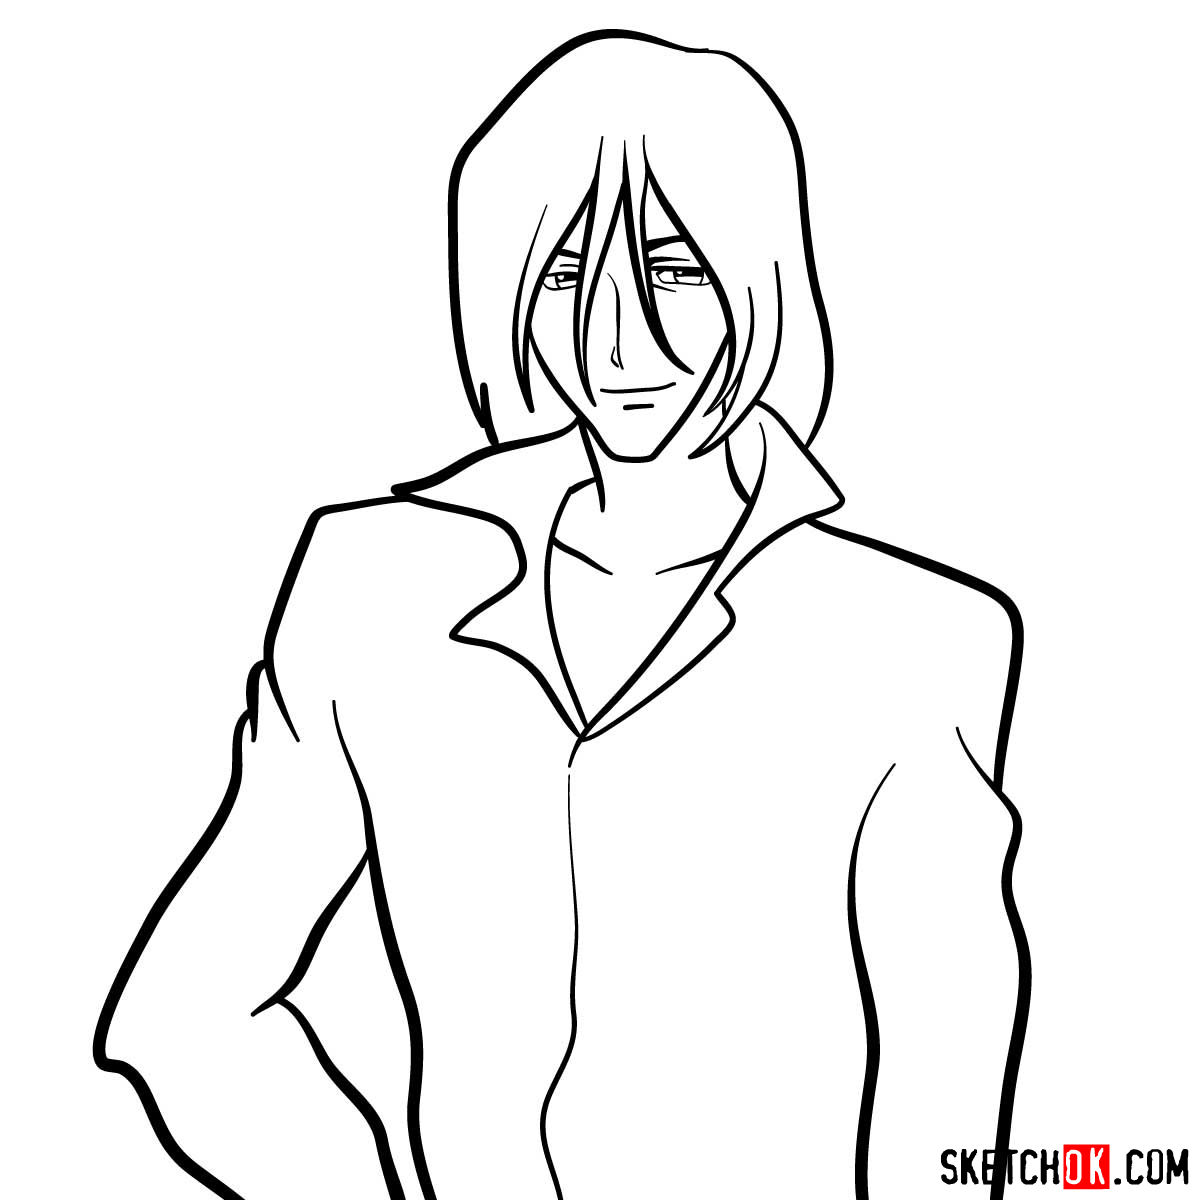 How to draw Gren from Cowboy Bebop anime